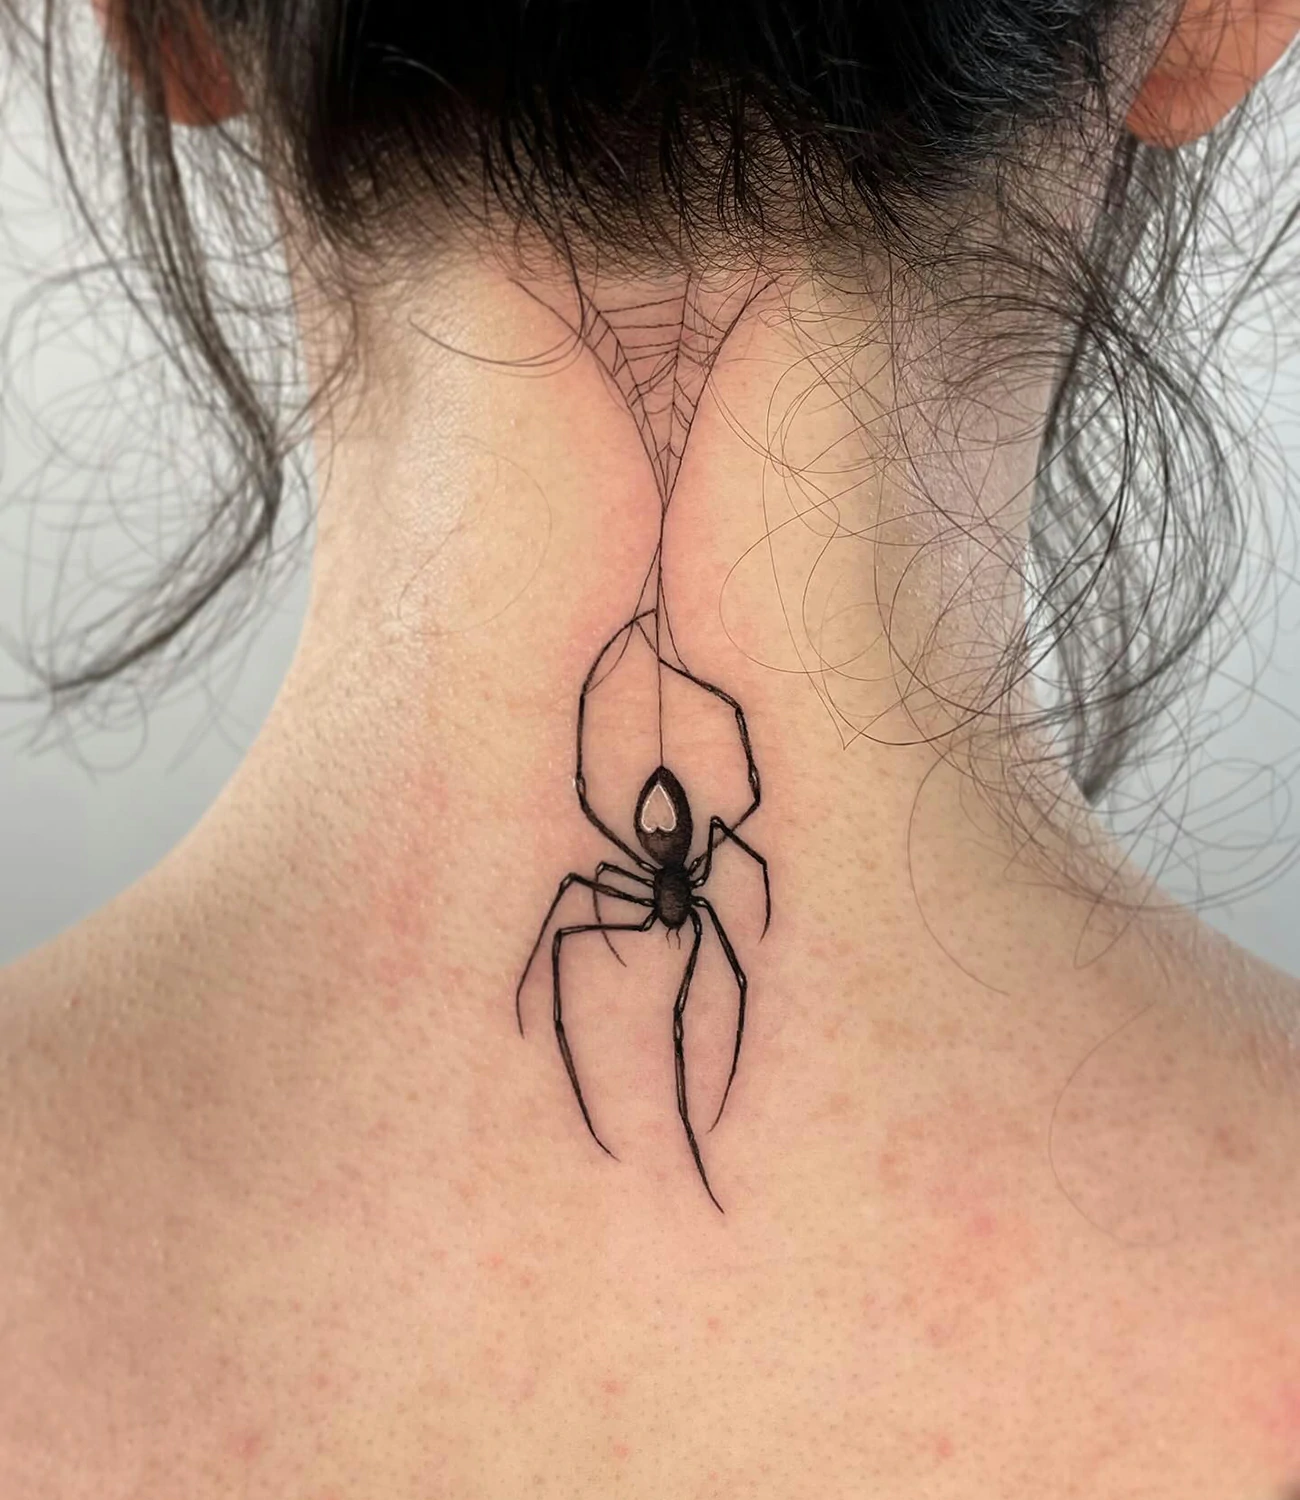 Pider tattoo on the neck